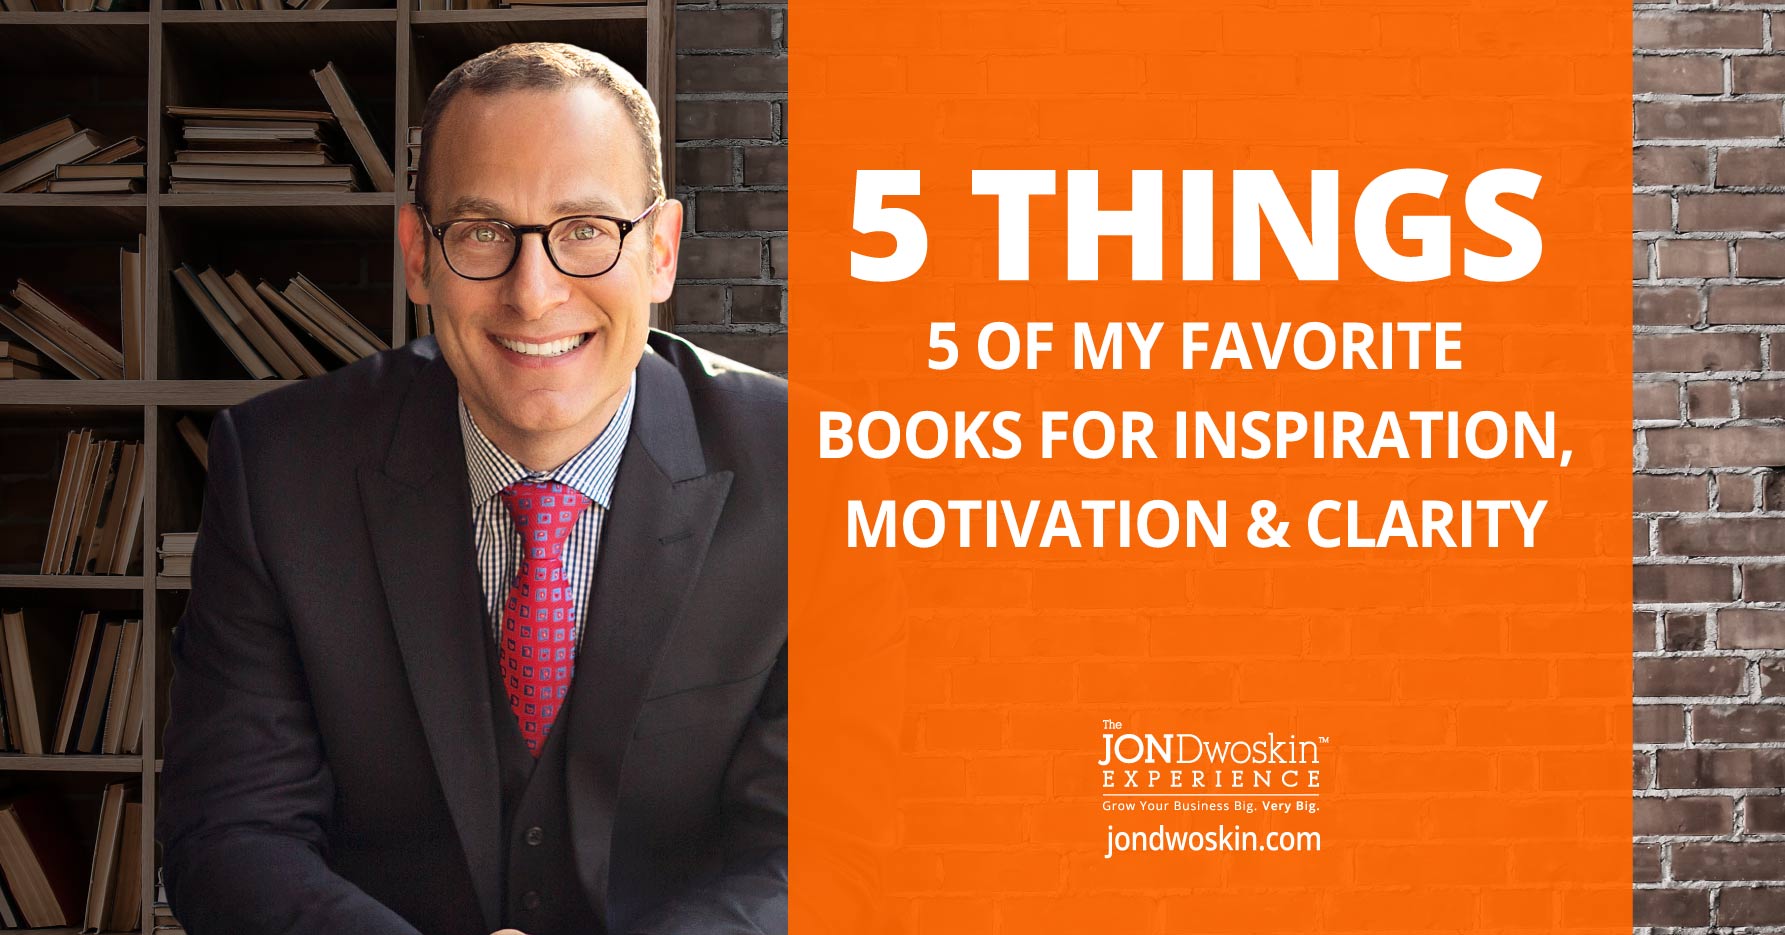 5 of My Favorite Books for Inspiration, Motivation & Clarity